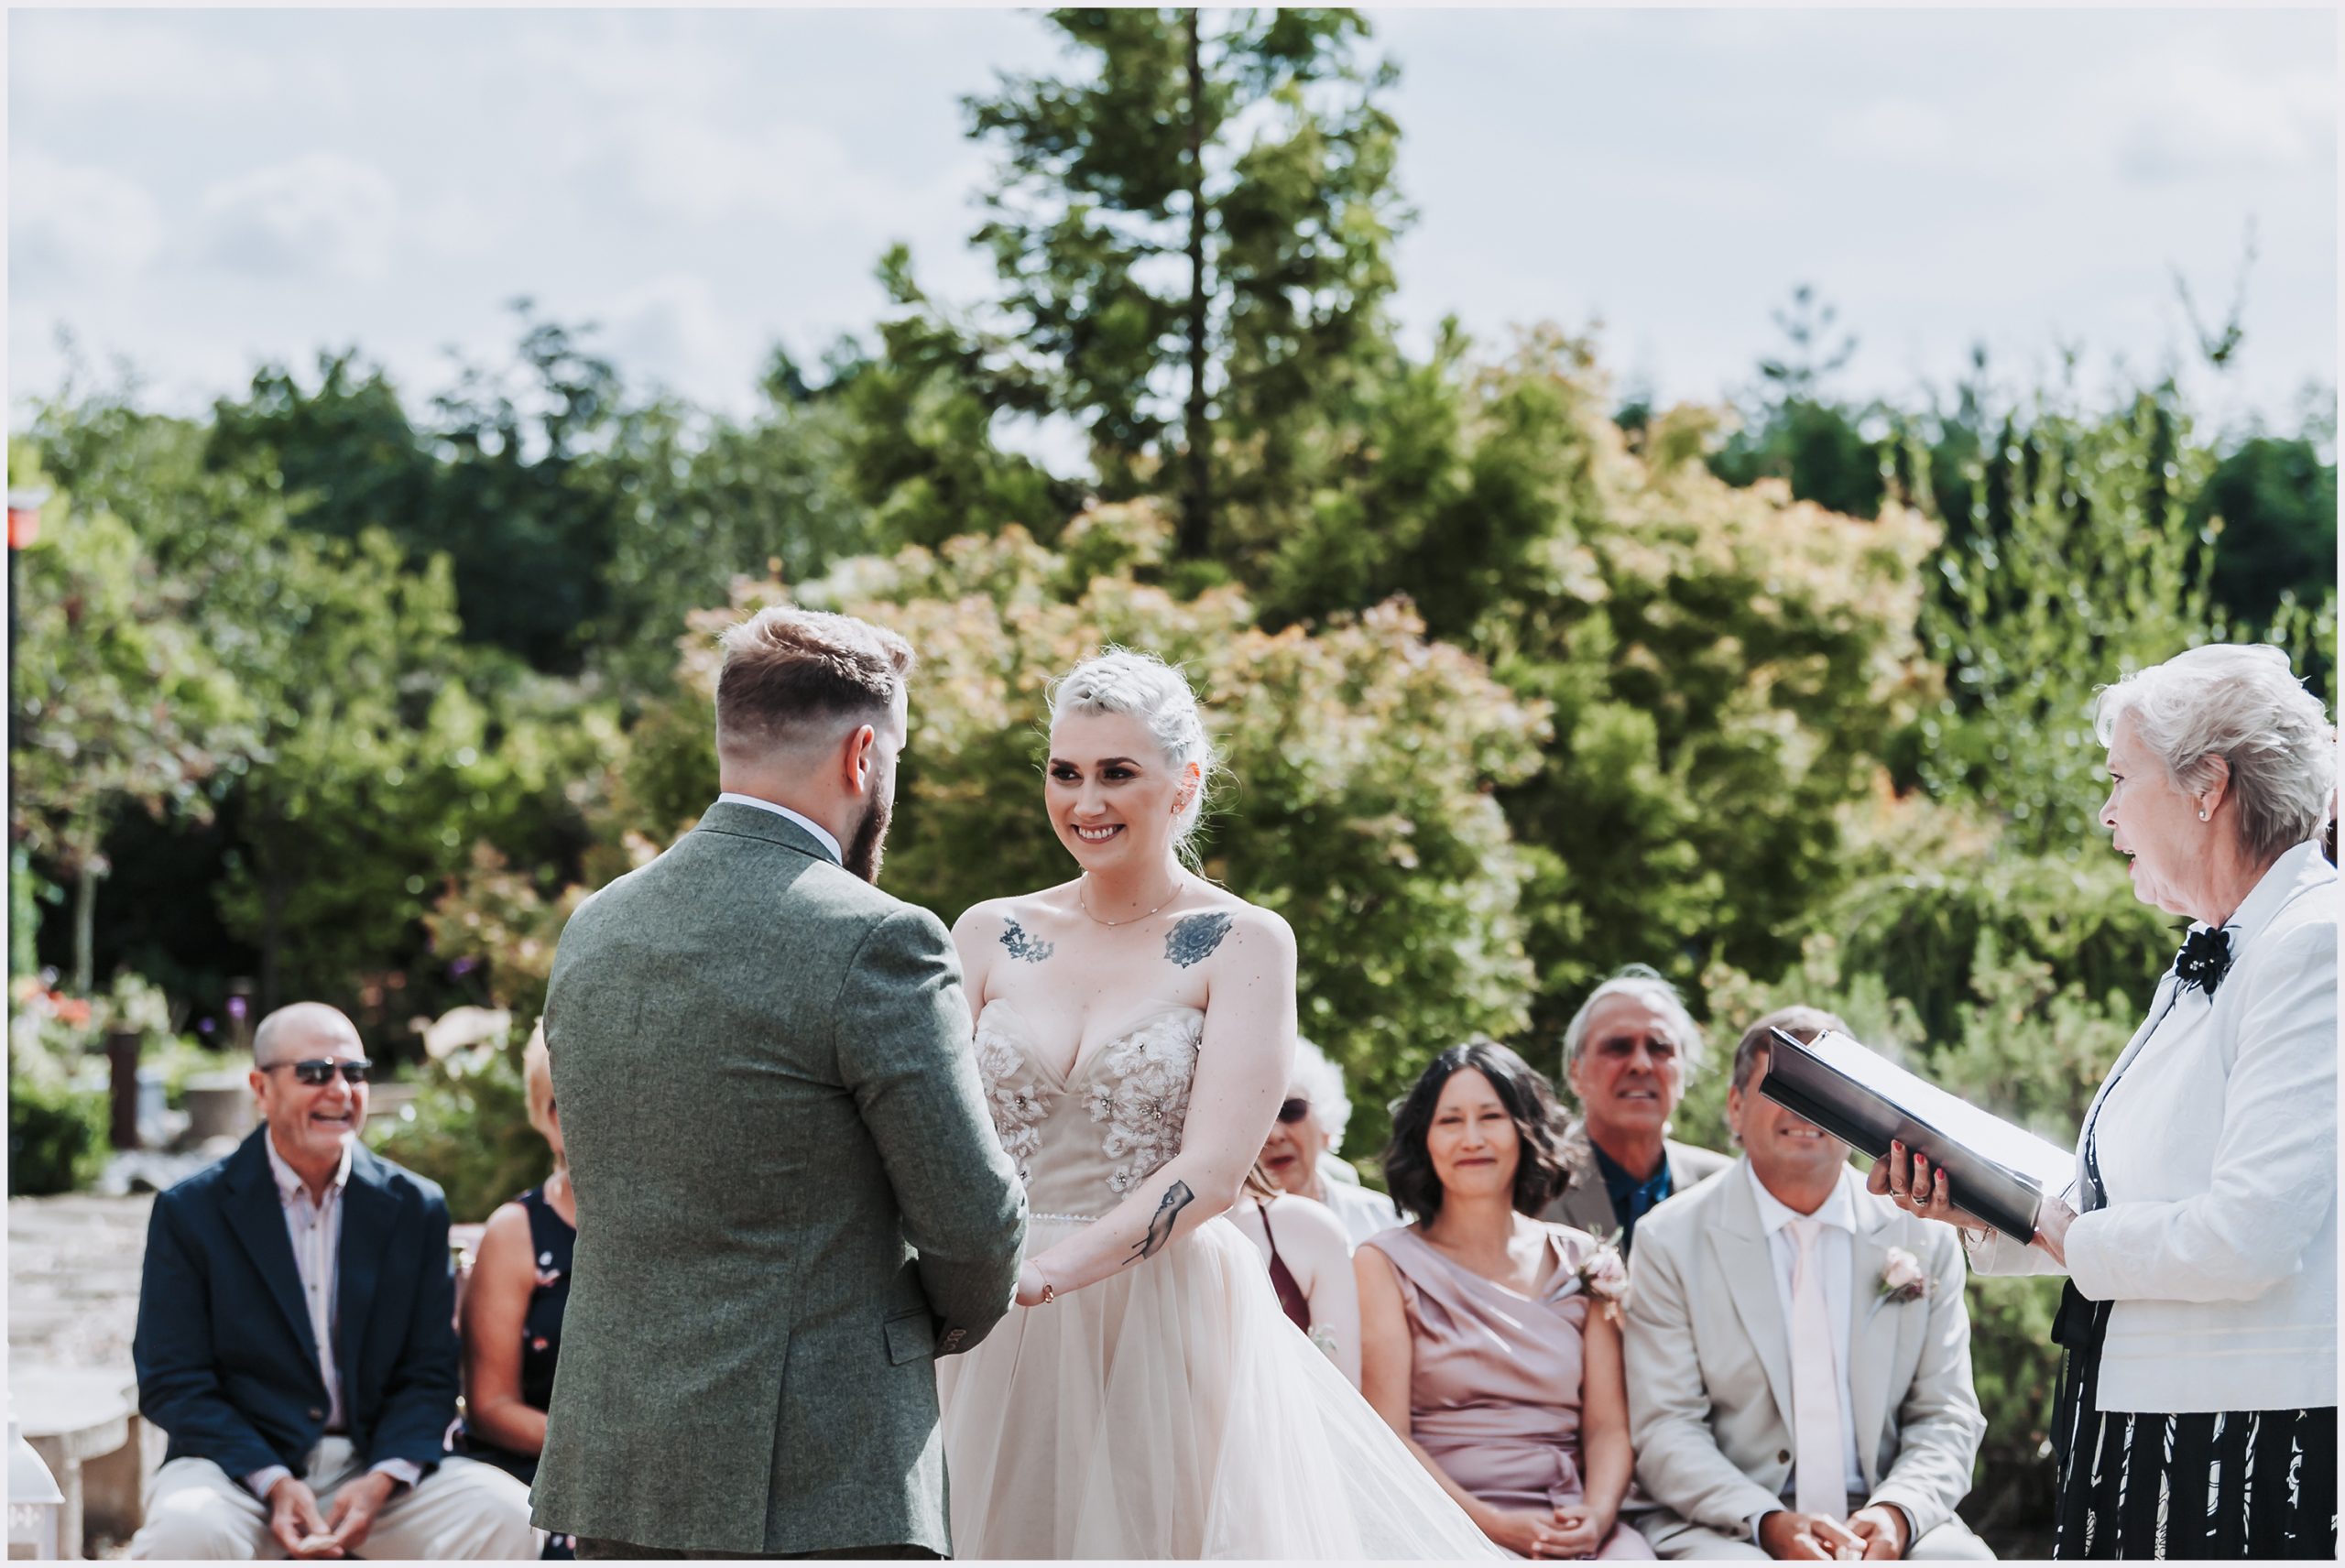 A bride smiles coyly at her fiance during their wedding ceremony.  The registrar who is marrying them stands on the right and guests are smiling happily as the vows are said during an outdoor ceremony at The Grosvenor Pulford Hotel and Spa